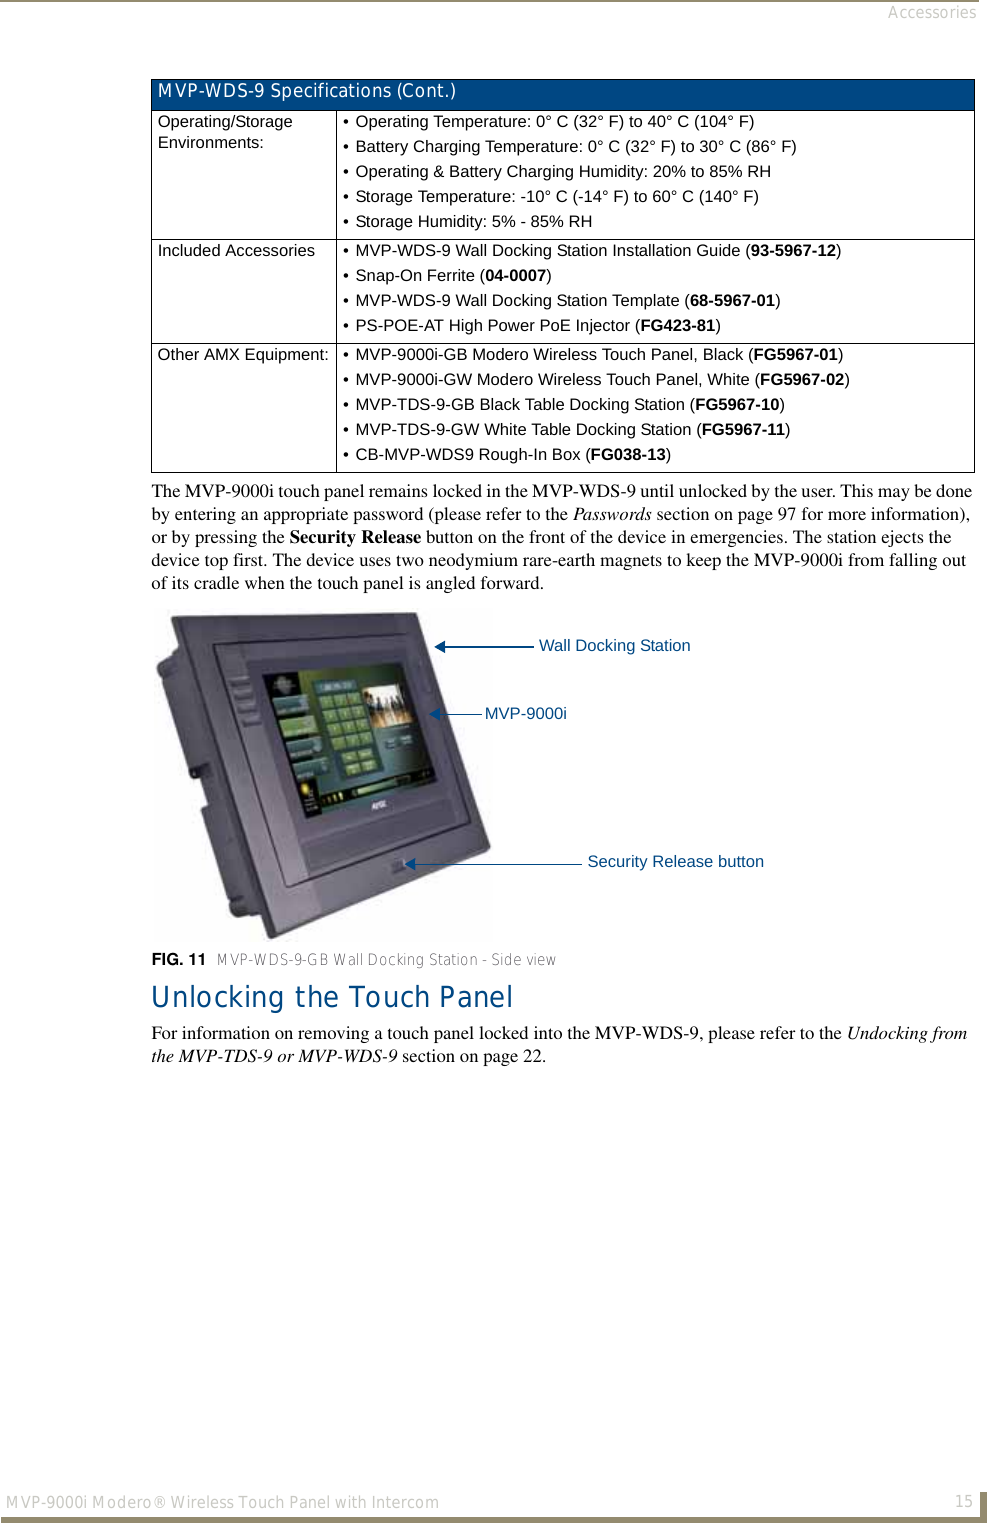 Accessories15MVP-9000i Modero® Wireless Touch Panel with IntercomThe MVP-9000i touch panel remains locked in the MVP-WDS-9 until unlocked by the user. This may be done by entering an appropriate password (please refer to the Passwords section on page 97 for more information), or by pressing the Security Release button on the front of the device in emergencies. The station ejects the device top first. The device uses two neodymium rare-earth magnets to keep the MVP-9000i from falling out of its cradle when the touch panel is angled forward.Unlocking the Touch PanelFor information on removing a touch panel locked into the MVP-WDS-9, please refer to the Undocking from the MVP-TDS-9 or MVP-WDS-9 section on page 22.MVP-WDS-9 Specifications (Cont.)Operating/StorageEnvironments:• Operating Temperature: 0° C (32° F) to 40° C (104° F)• Battery Charging Temperature: 0° C (32° F) to 30° C (86° F)• Operating &amp; Battery Charging Humidity: 20% to 85% RH• Storage Temperature: -10° C (-14° F) to 60° C (140° F)• Storage Humidity: 5% - 85% RHIncluded Accessories • MVP-WDS-9 Wall Docking Station Installation Guide (93-5967-12)• Snap-On Ferrite (04-0007)• MVP-WDS-9 Wall Docking Station Template (68-5967-01)• PS-POE-AT High Power PoE Injector (FG423-81)Other AMX Equipment: • MVP-9000i-GB Modero Wireless Touch Panel, Black (FG5967-01)• MVP-9000i-GW Modero Wireless Touch Panel, White (FG5967-02)• MVP-TDS-9-GB Black Table Docking Station (FG5967-10)• MVP-TDS-9-GW White Table Docking Station (FG5967-11)• CB-MVP-WDS9 Rough-In Box (FG038-13)FIG. 11  MVP-WDS-9-GB Wall Docking Station - Side viewMVP-9000iWall Docking StationSecurity Release button